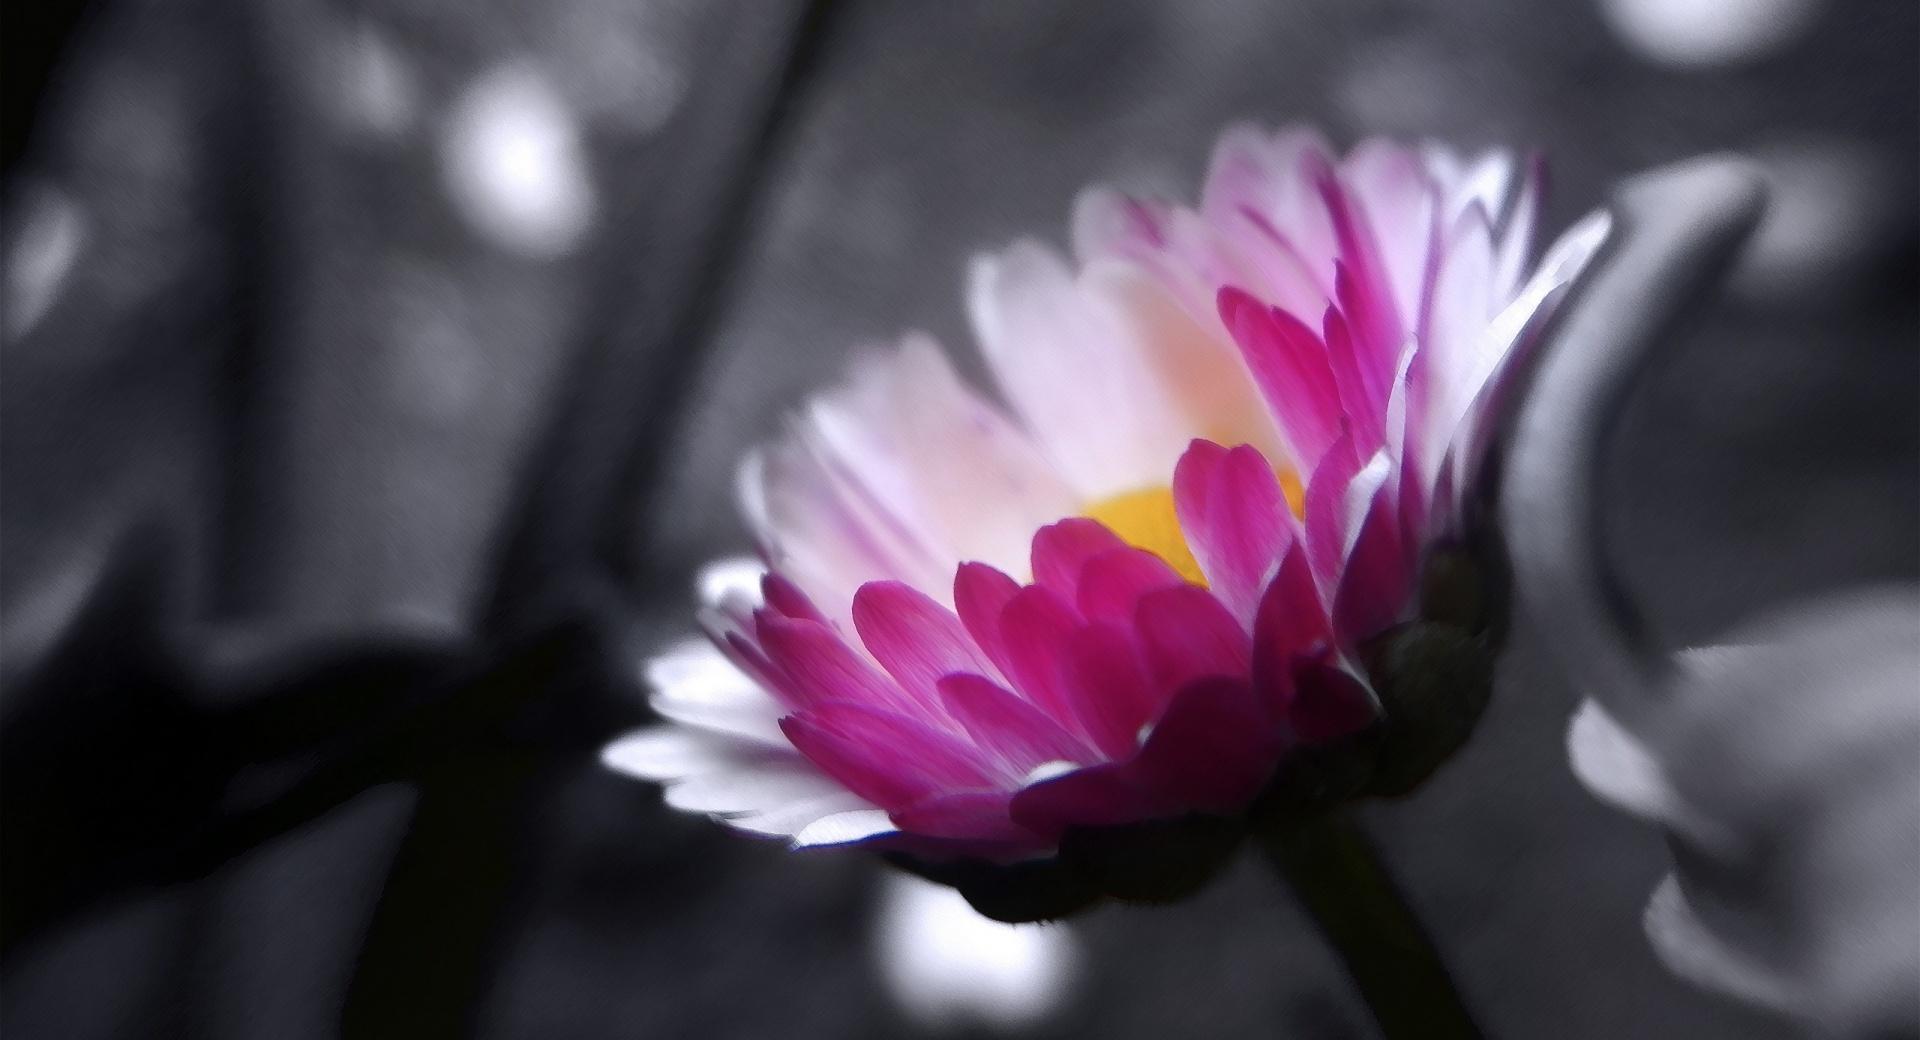 Pink Flower On Black And White Background wallpapers HD quality